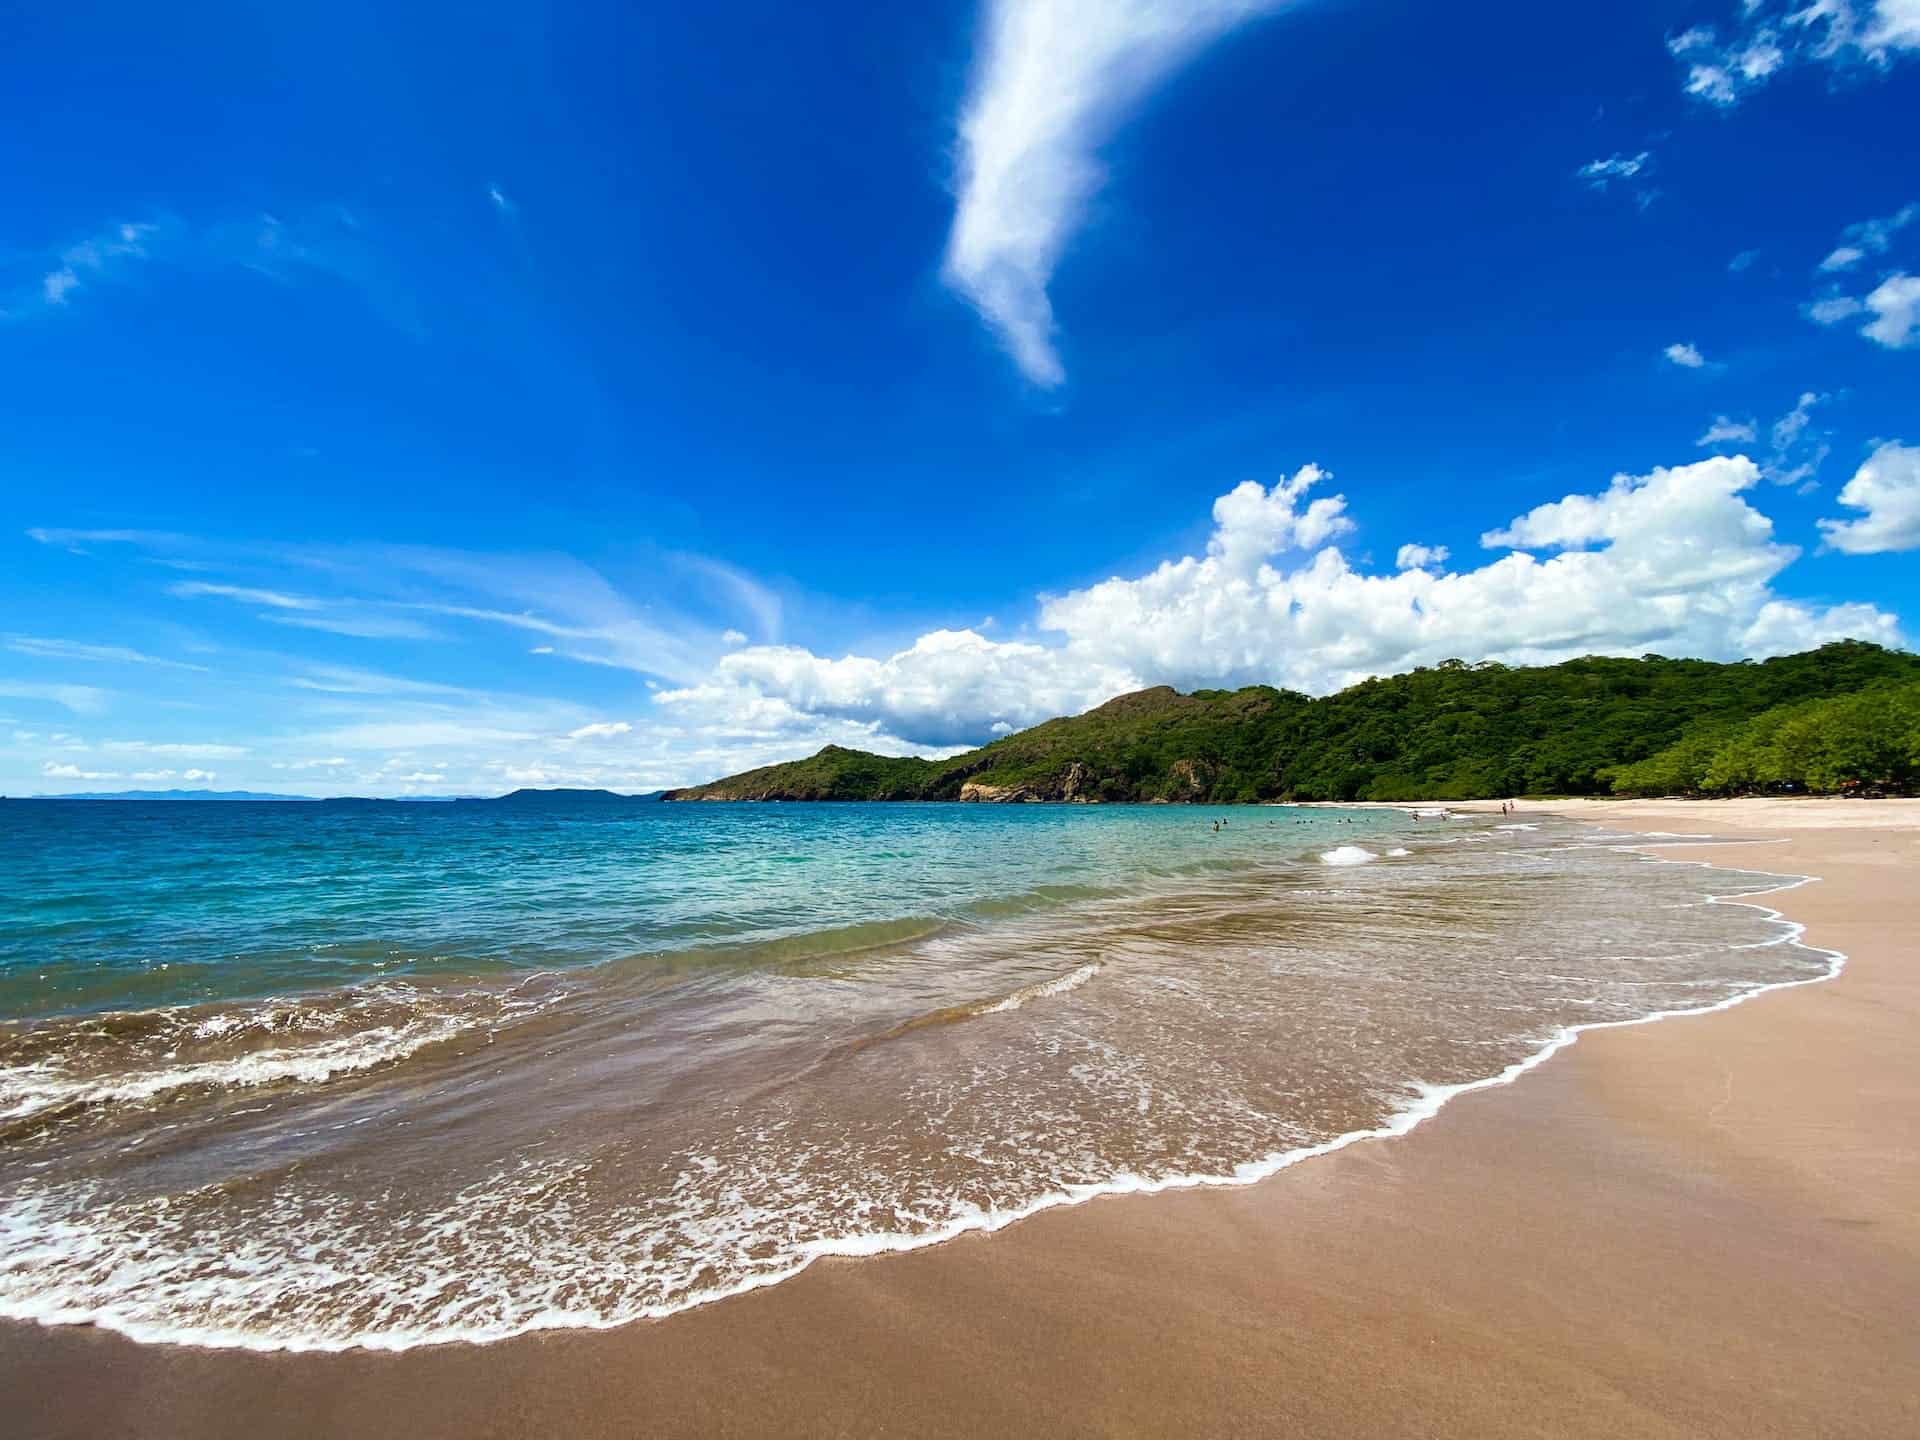 Beach in Costa Rica with mountains in the background on a clear day.